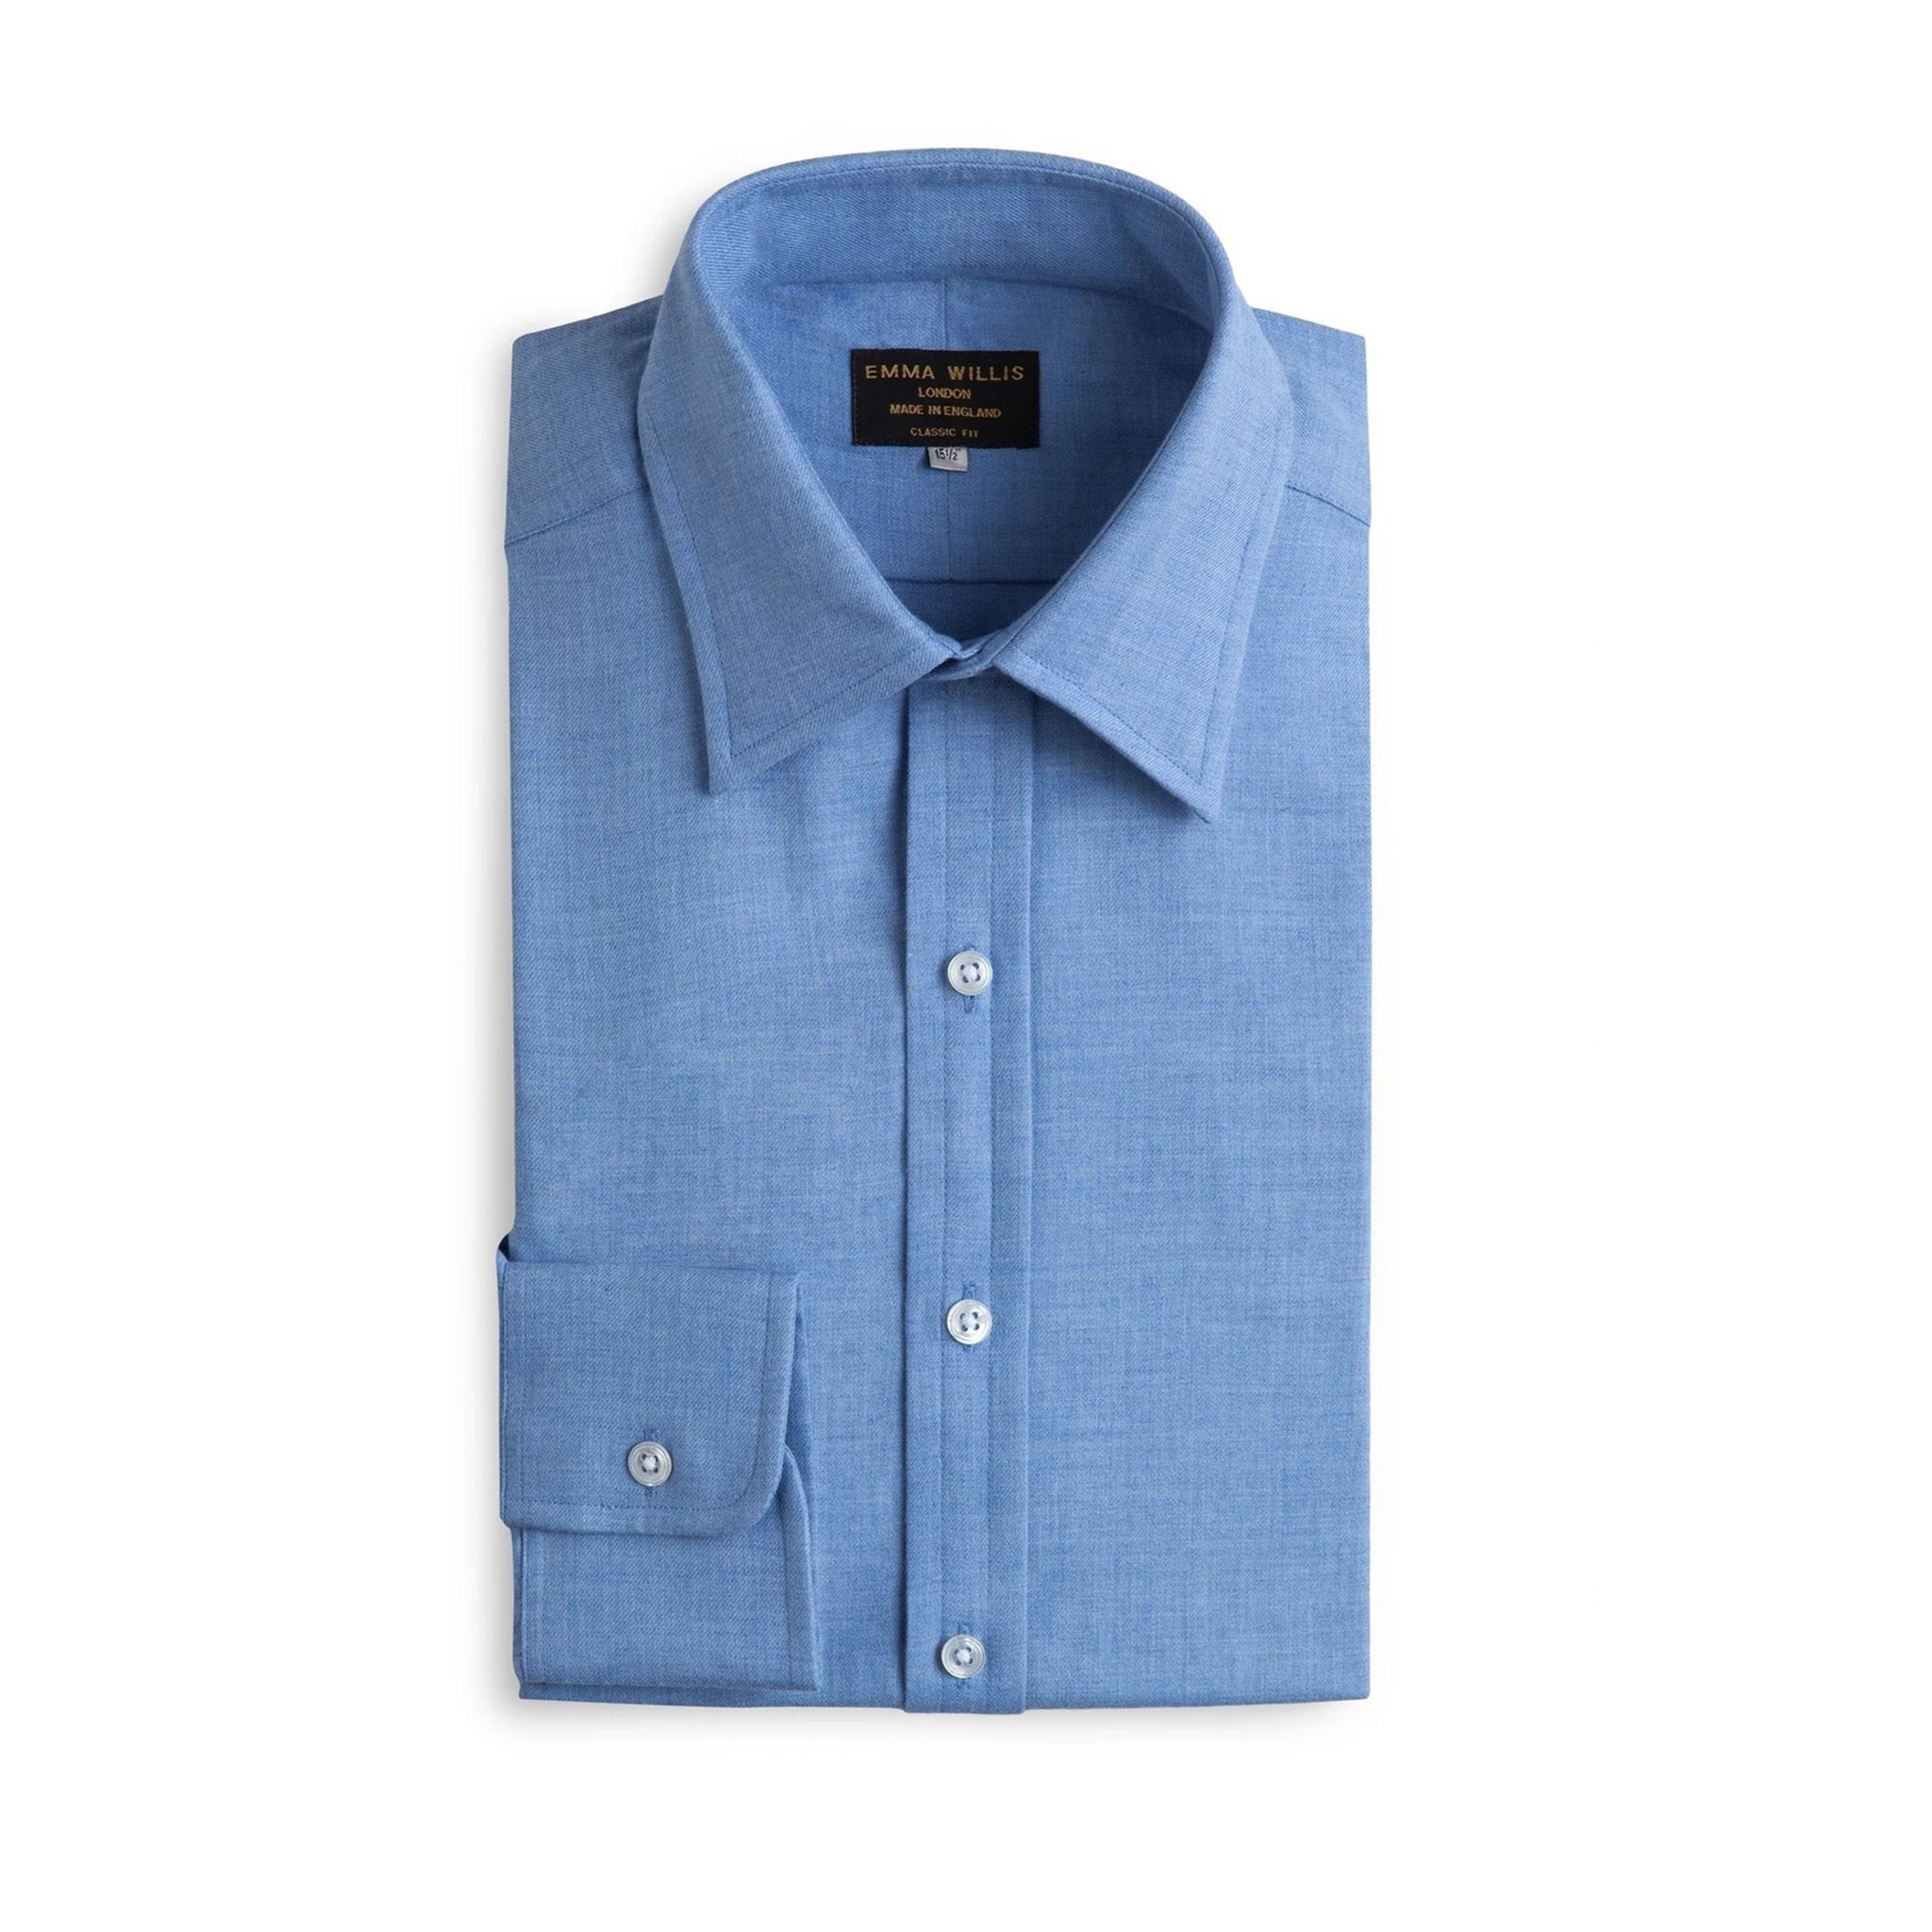 Classic Shirt - Ready to Wear